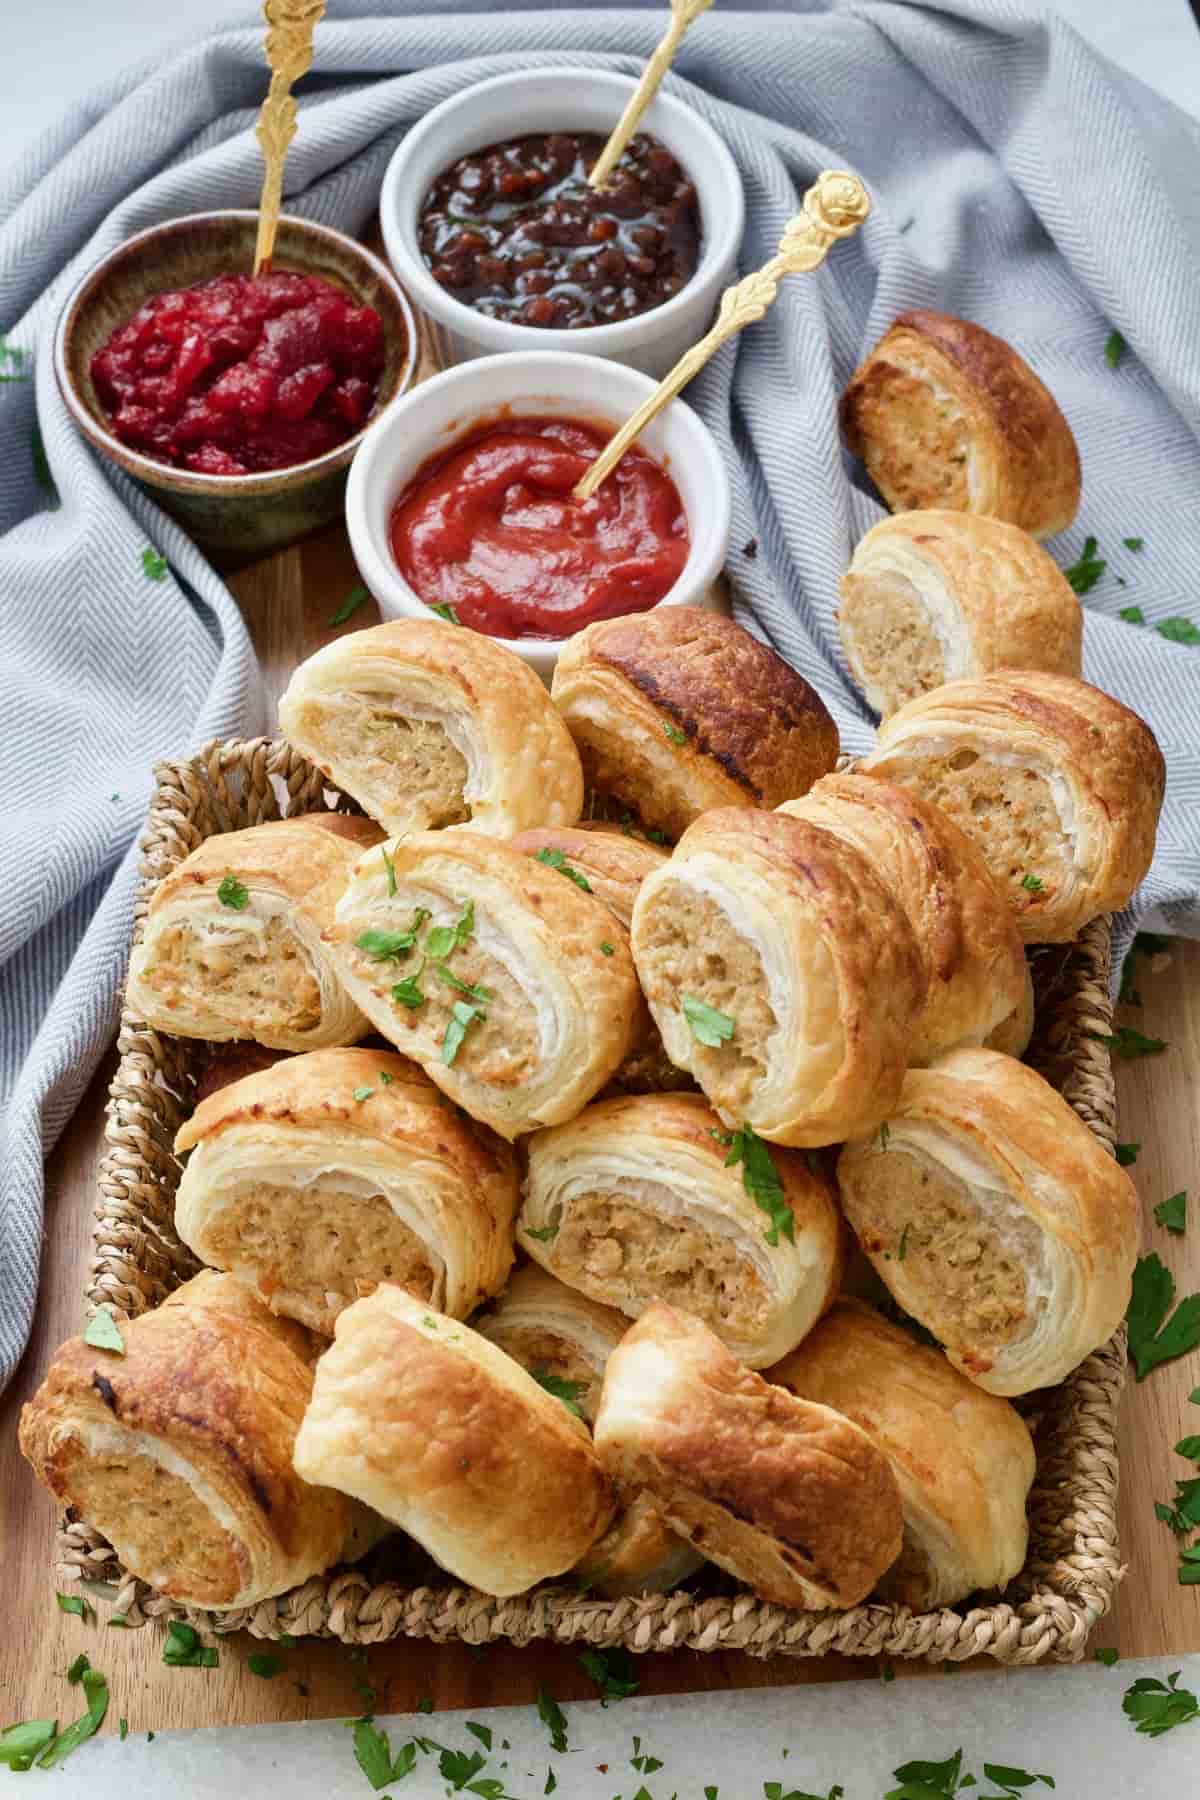 Vegan sausage rolls in the basket with sauces behind it.